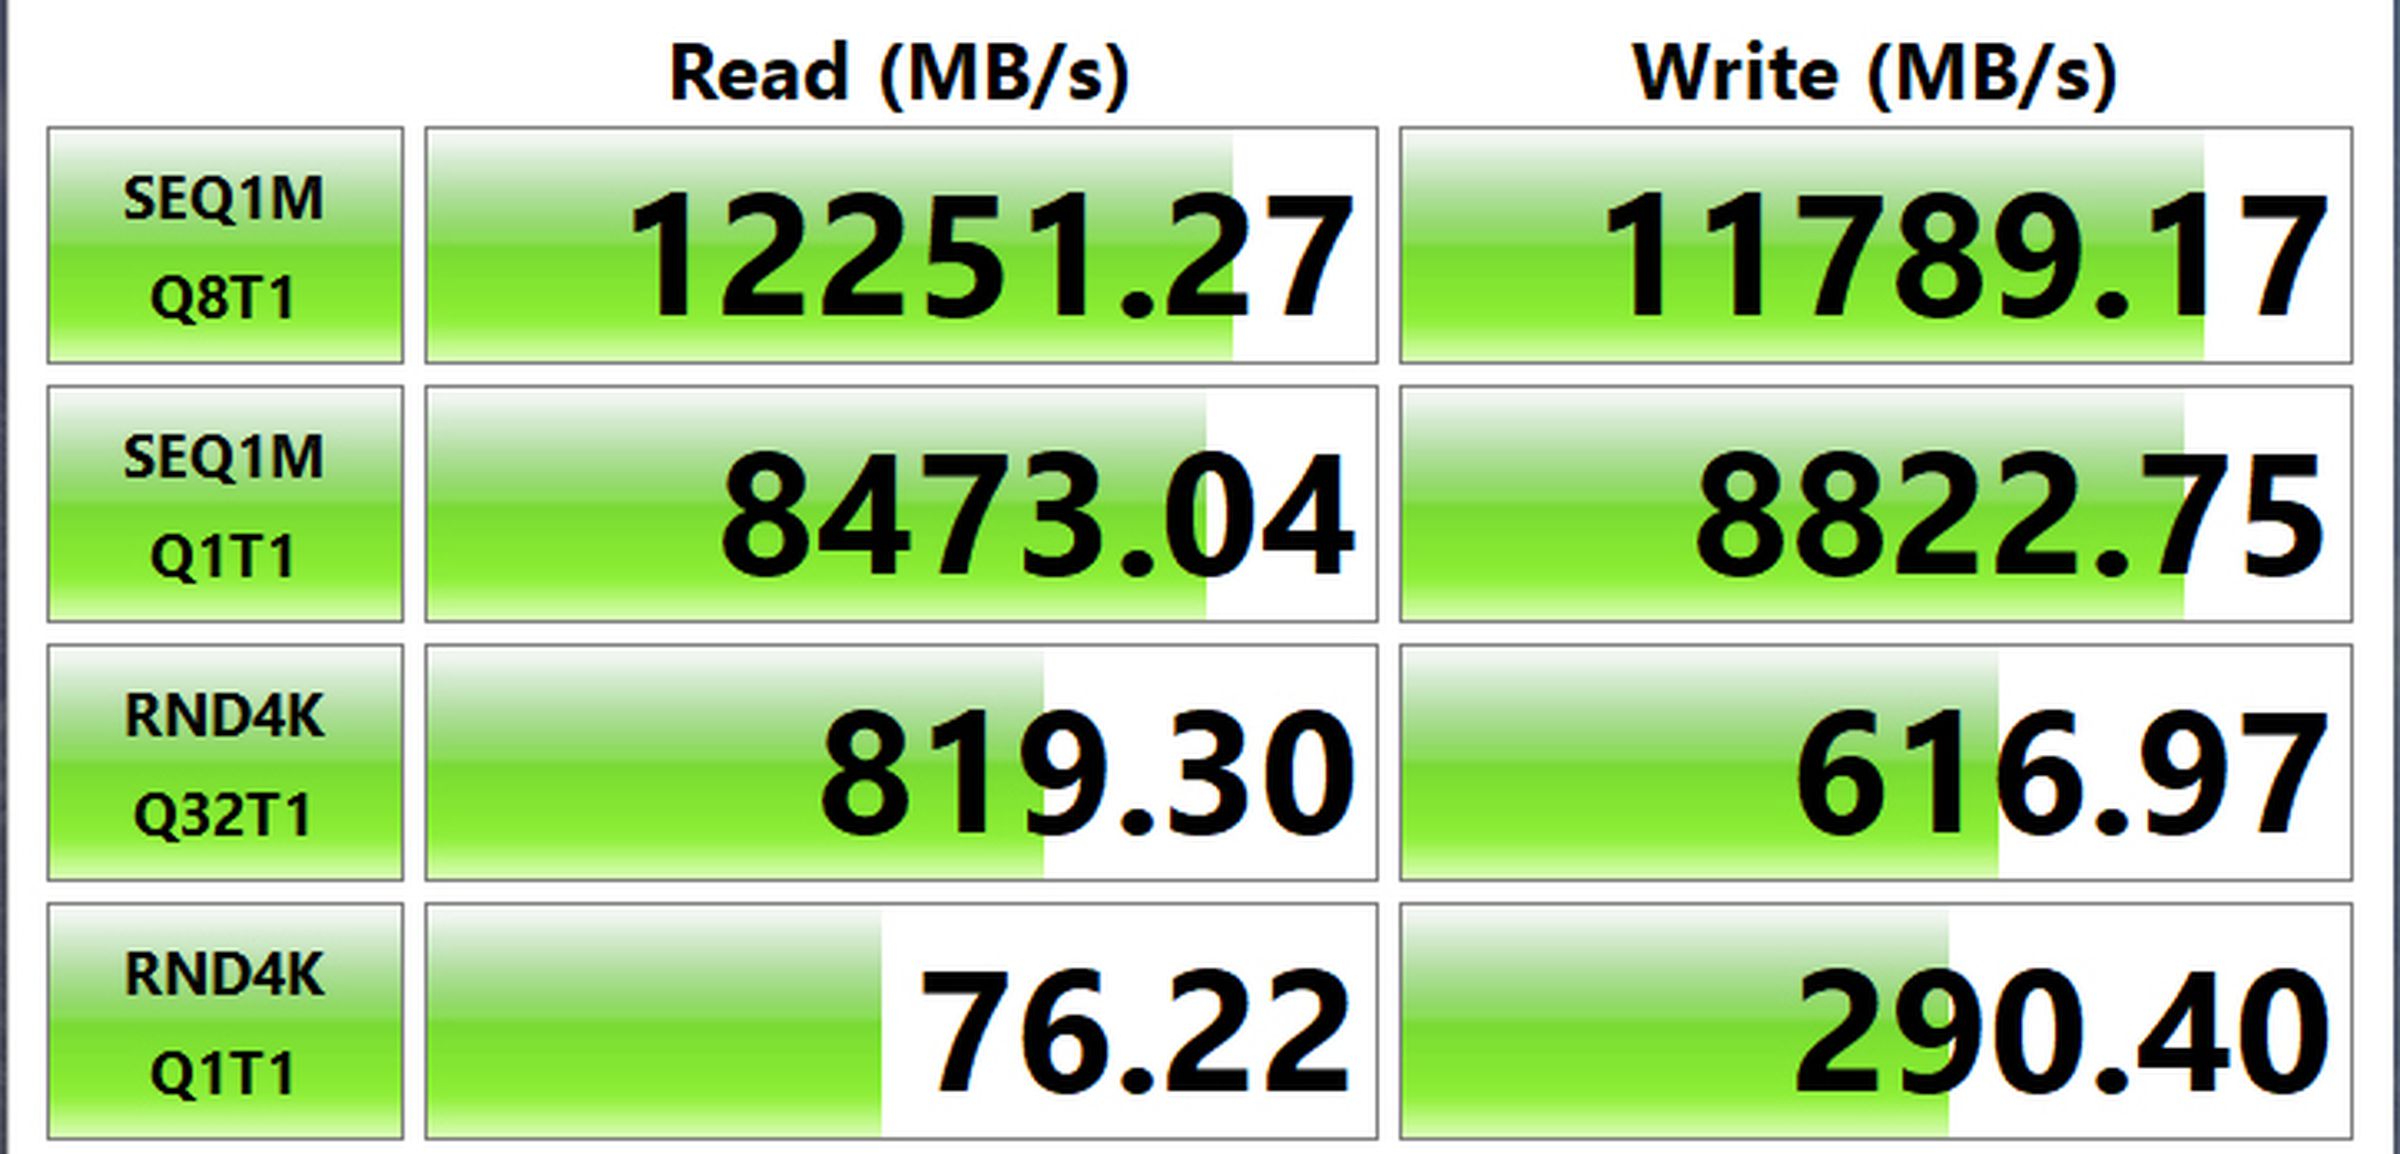 Impressive speeds from Crucial’s T700.